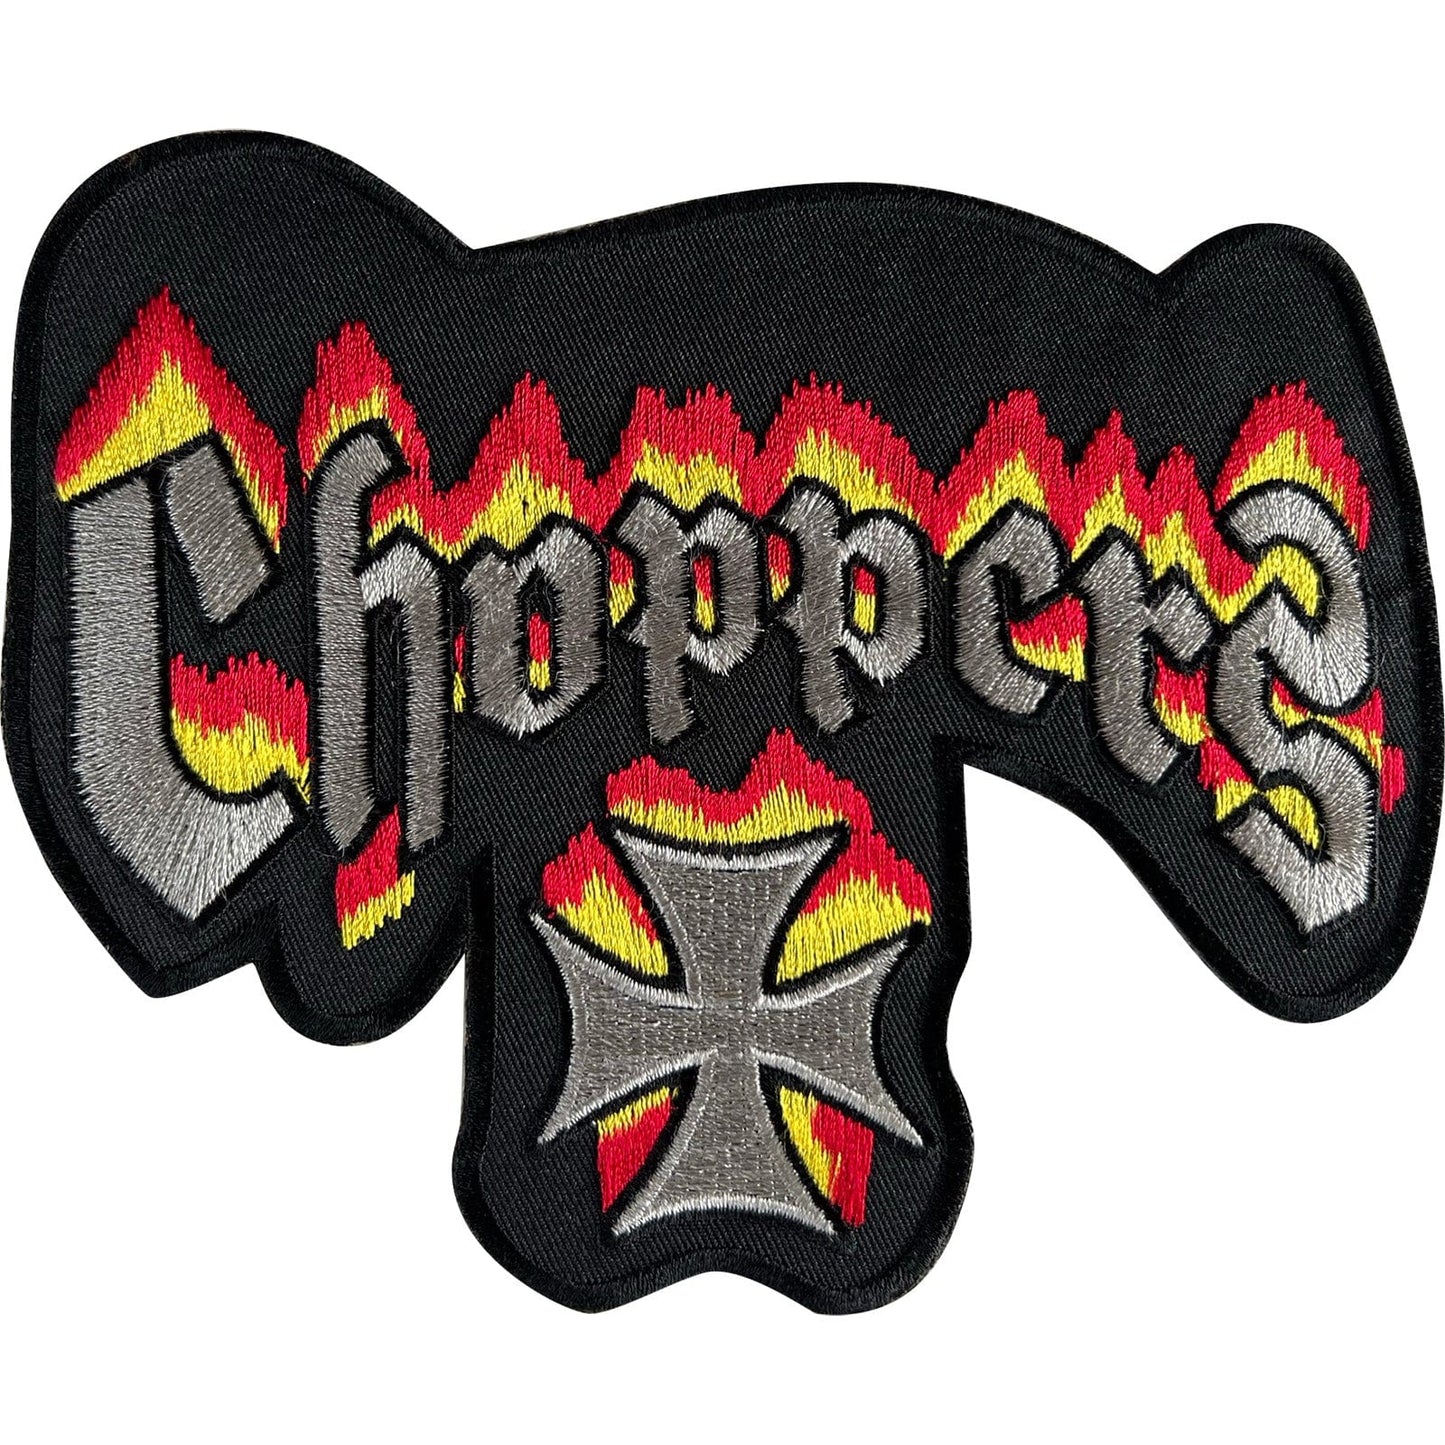 Large Choppers Cross Motorcycle Motorbike Jacket Vest Patch Iron On Sew On Badge